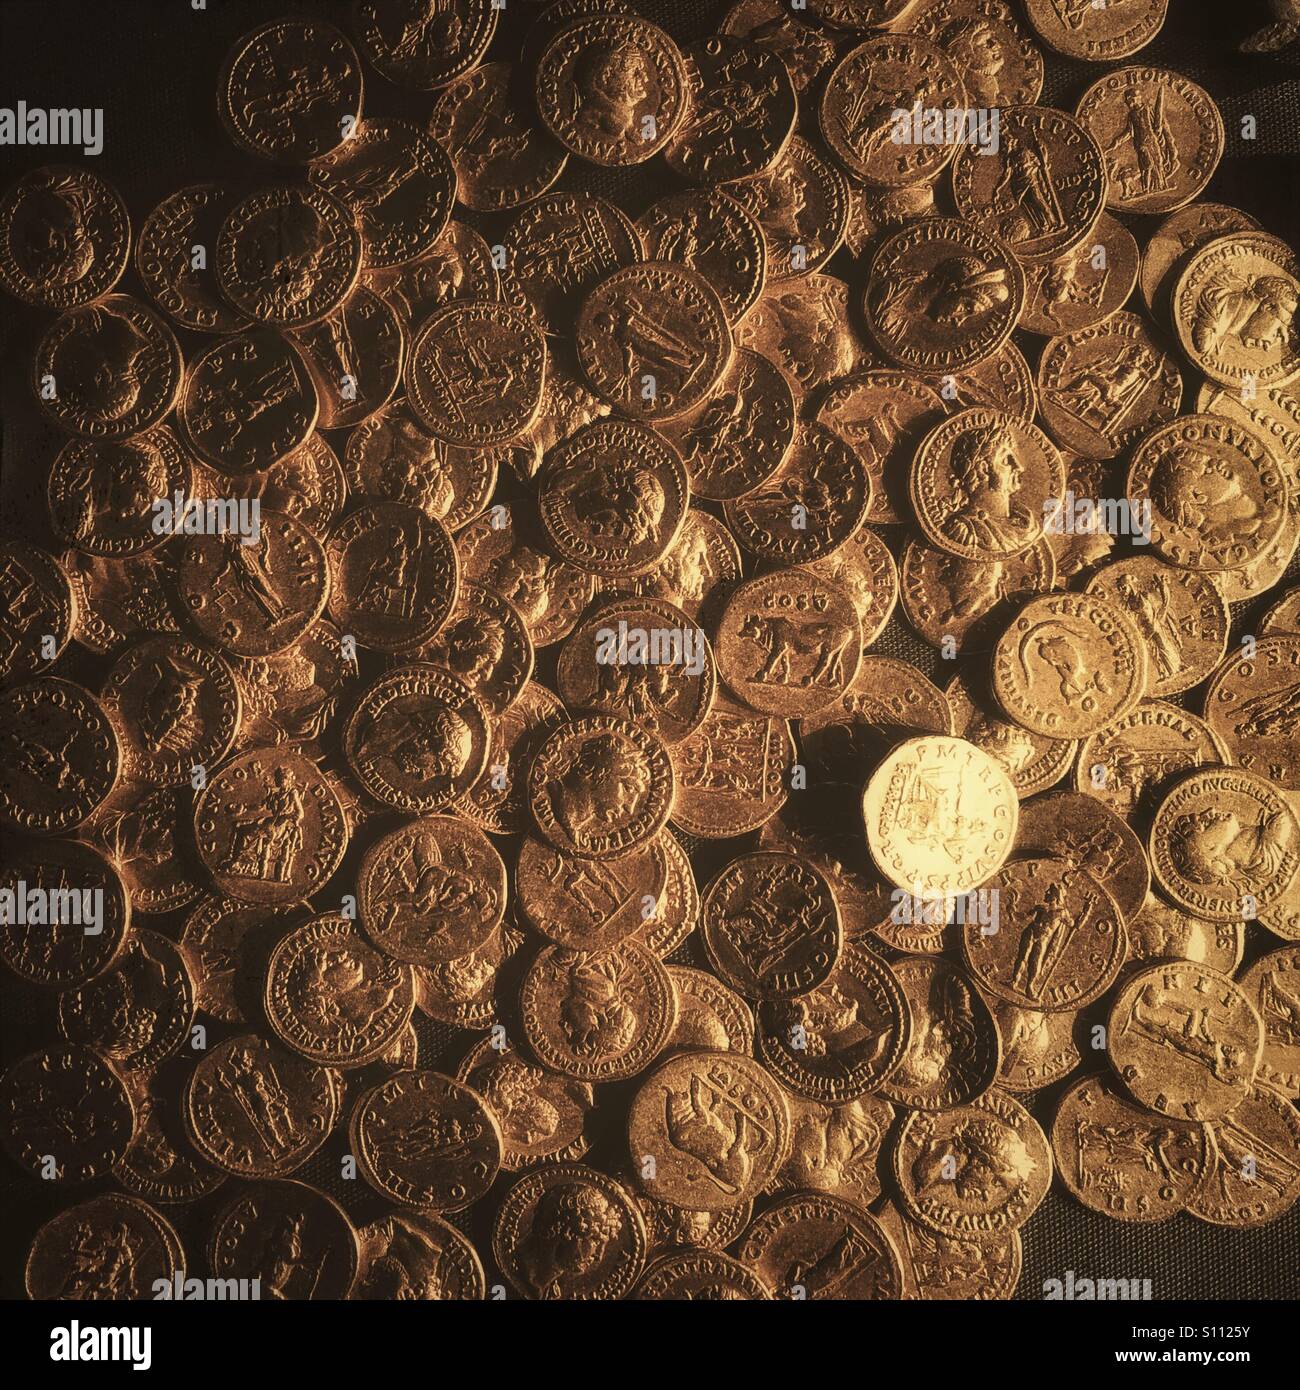 Hoard of gold Roman coins. Stock Photo